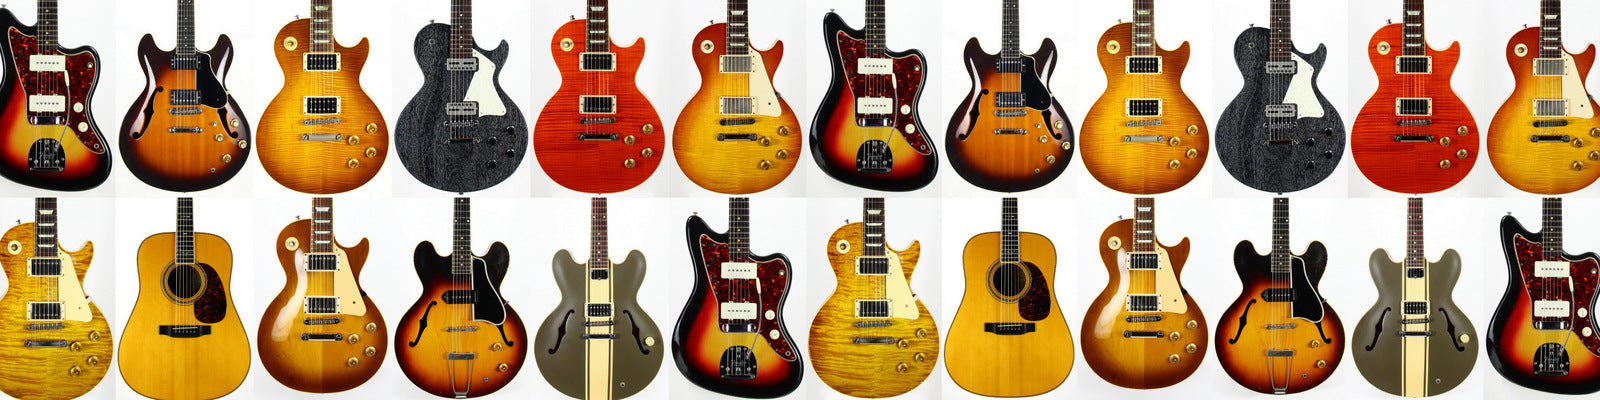 Large banner of guitars from many quality brands